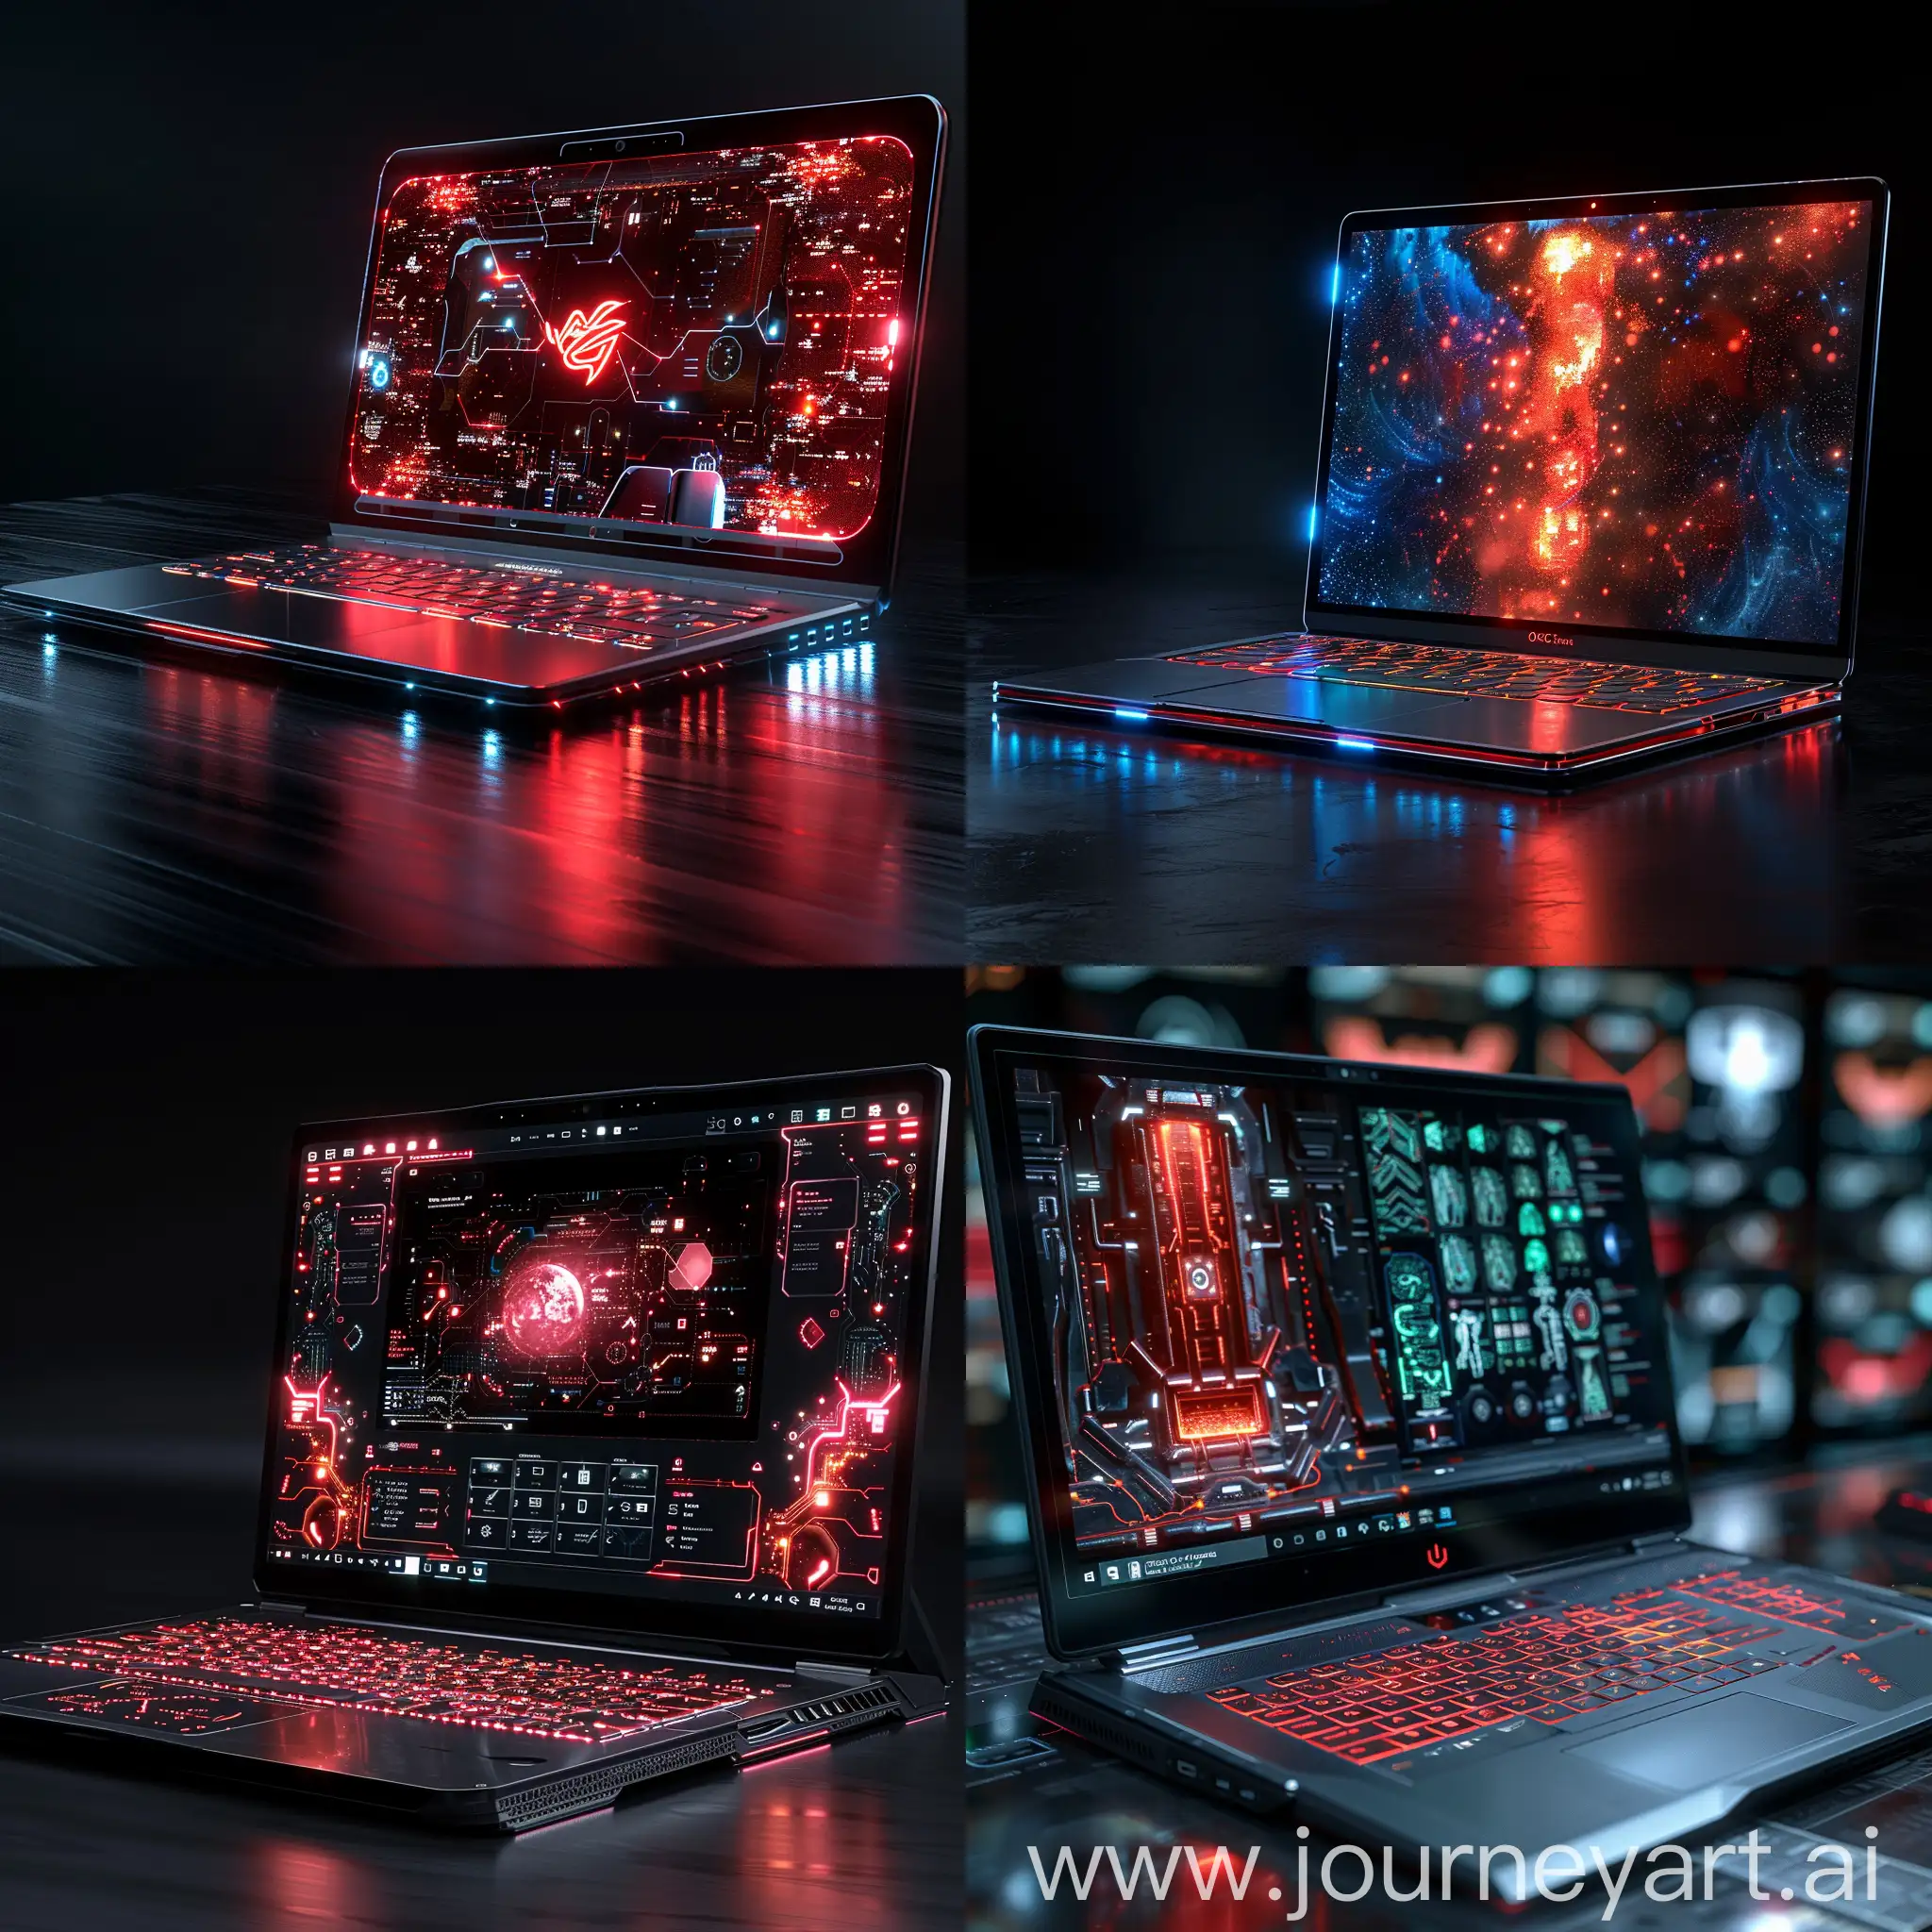 Futuristic laptop, Foldable Display, Holographic Projection, AI Assistant, Biometric Security, Wireless Charging, Modular Components, Eye-Tracking Technology, Enhanced Connectivity, AR/VR Capabilities, Self-Healing Technology, Sleek and Minimalist, Transparent Displays, RGB Lighting, Thin Bezels, Dynamic Patterns, Carbon Fiber Body, Floating Keyboard, Hidden Ports, Adaptive Ergonomics, Innovative Cooling System, Self-Cleaning Surfaces, Nanostructured Materials, Nanoparticle-based Displays, Nanorobotics, Nanoscale Cooling System, Nanophotonic Elements, Nanowire Batteries, Nanoporous Structures, Nano-Integrated Sensors, Nanomaterial Coatings, octane render --stylize 1000